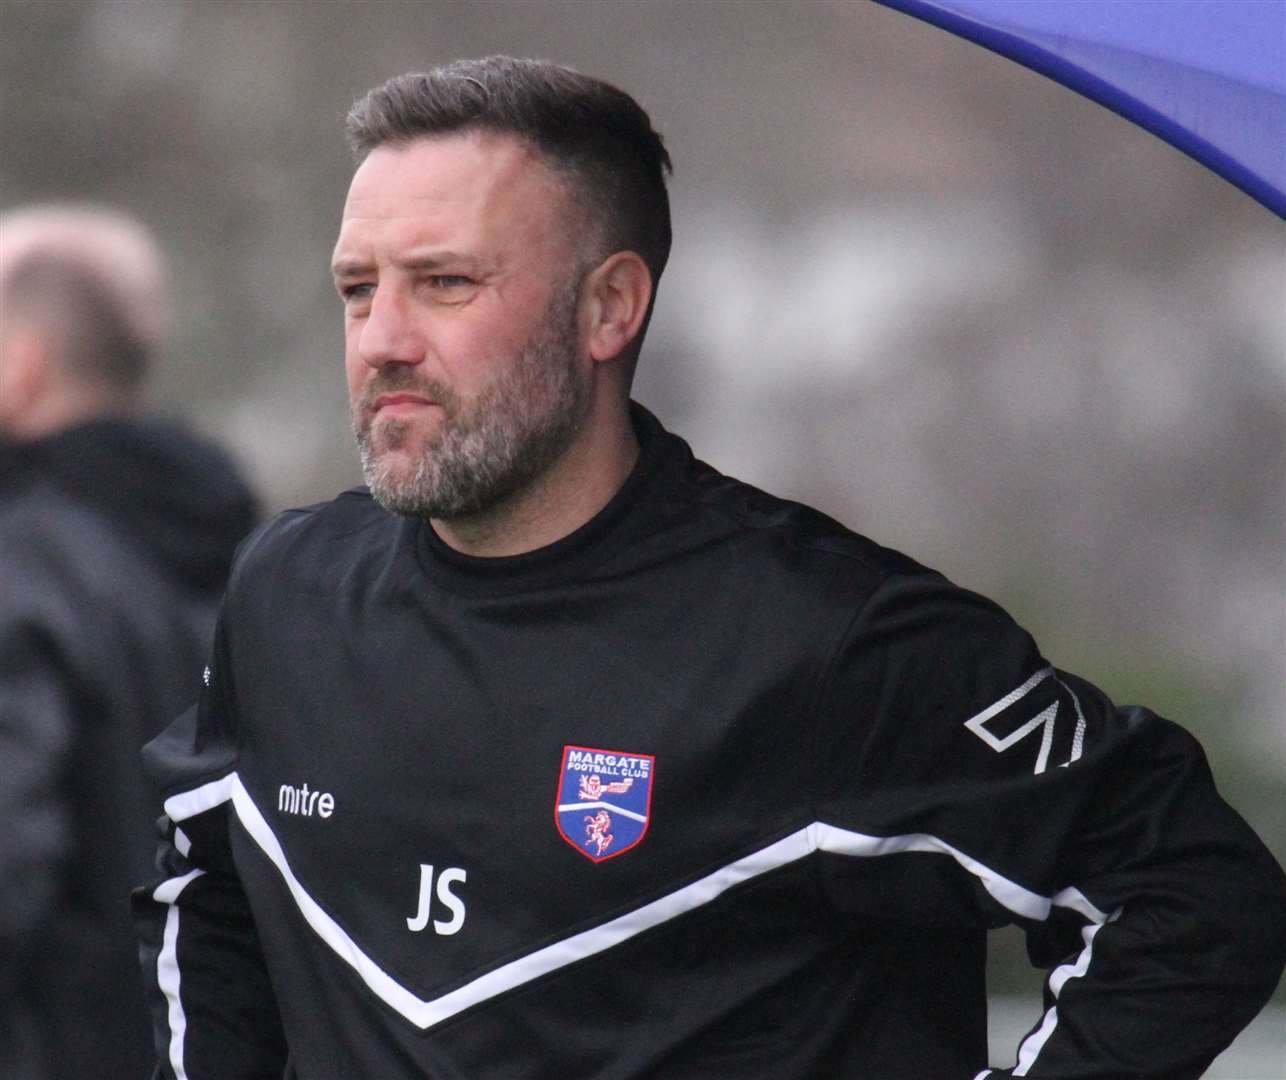 Margate manager Jay Saunders Picture: Don Walker